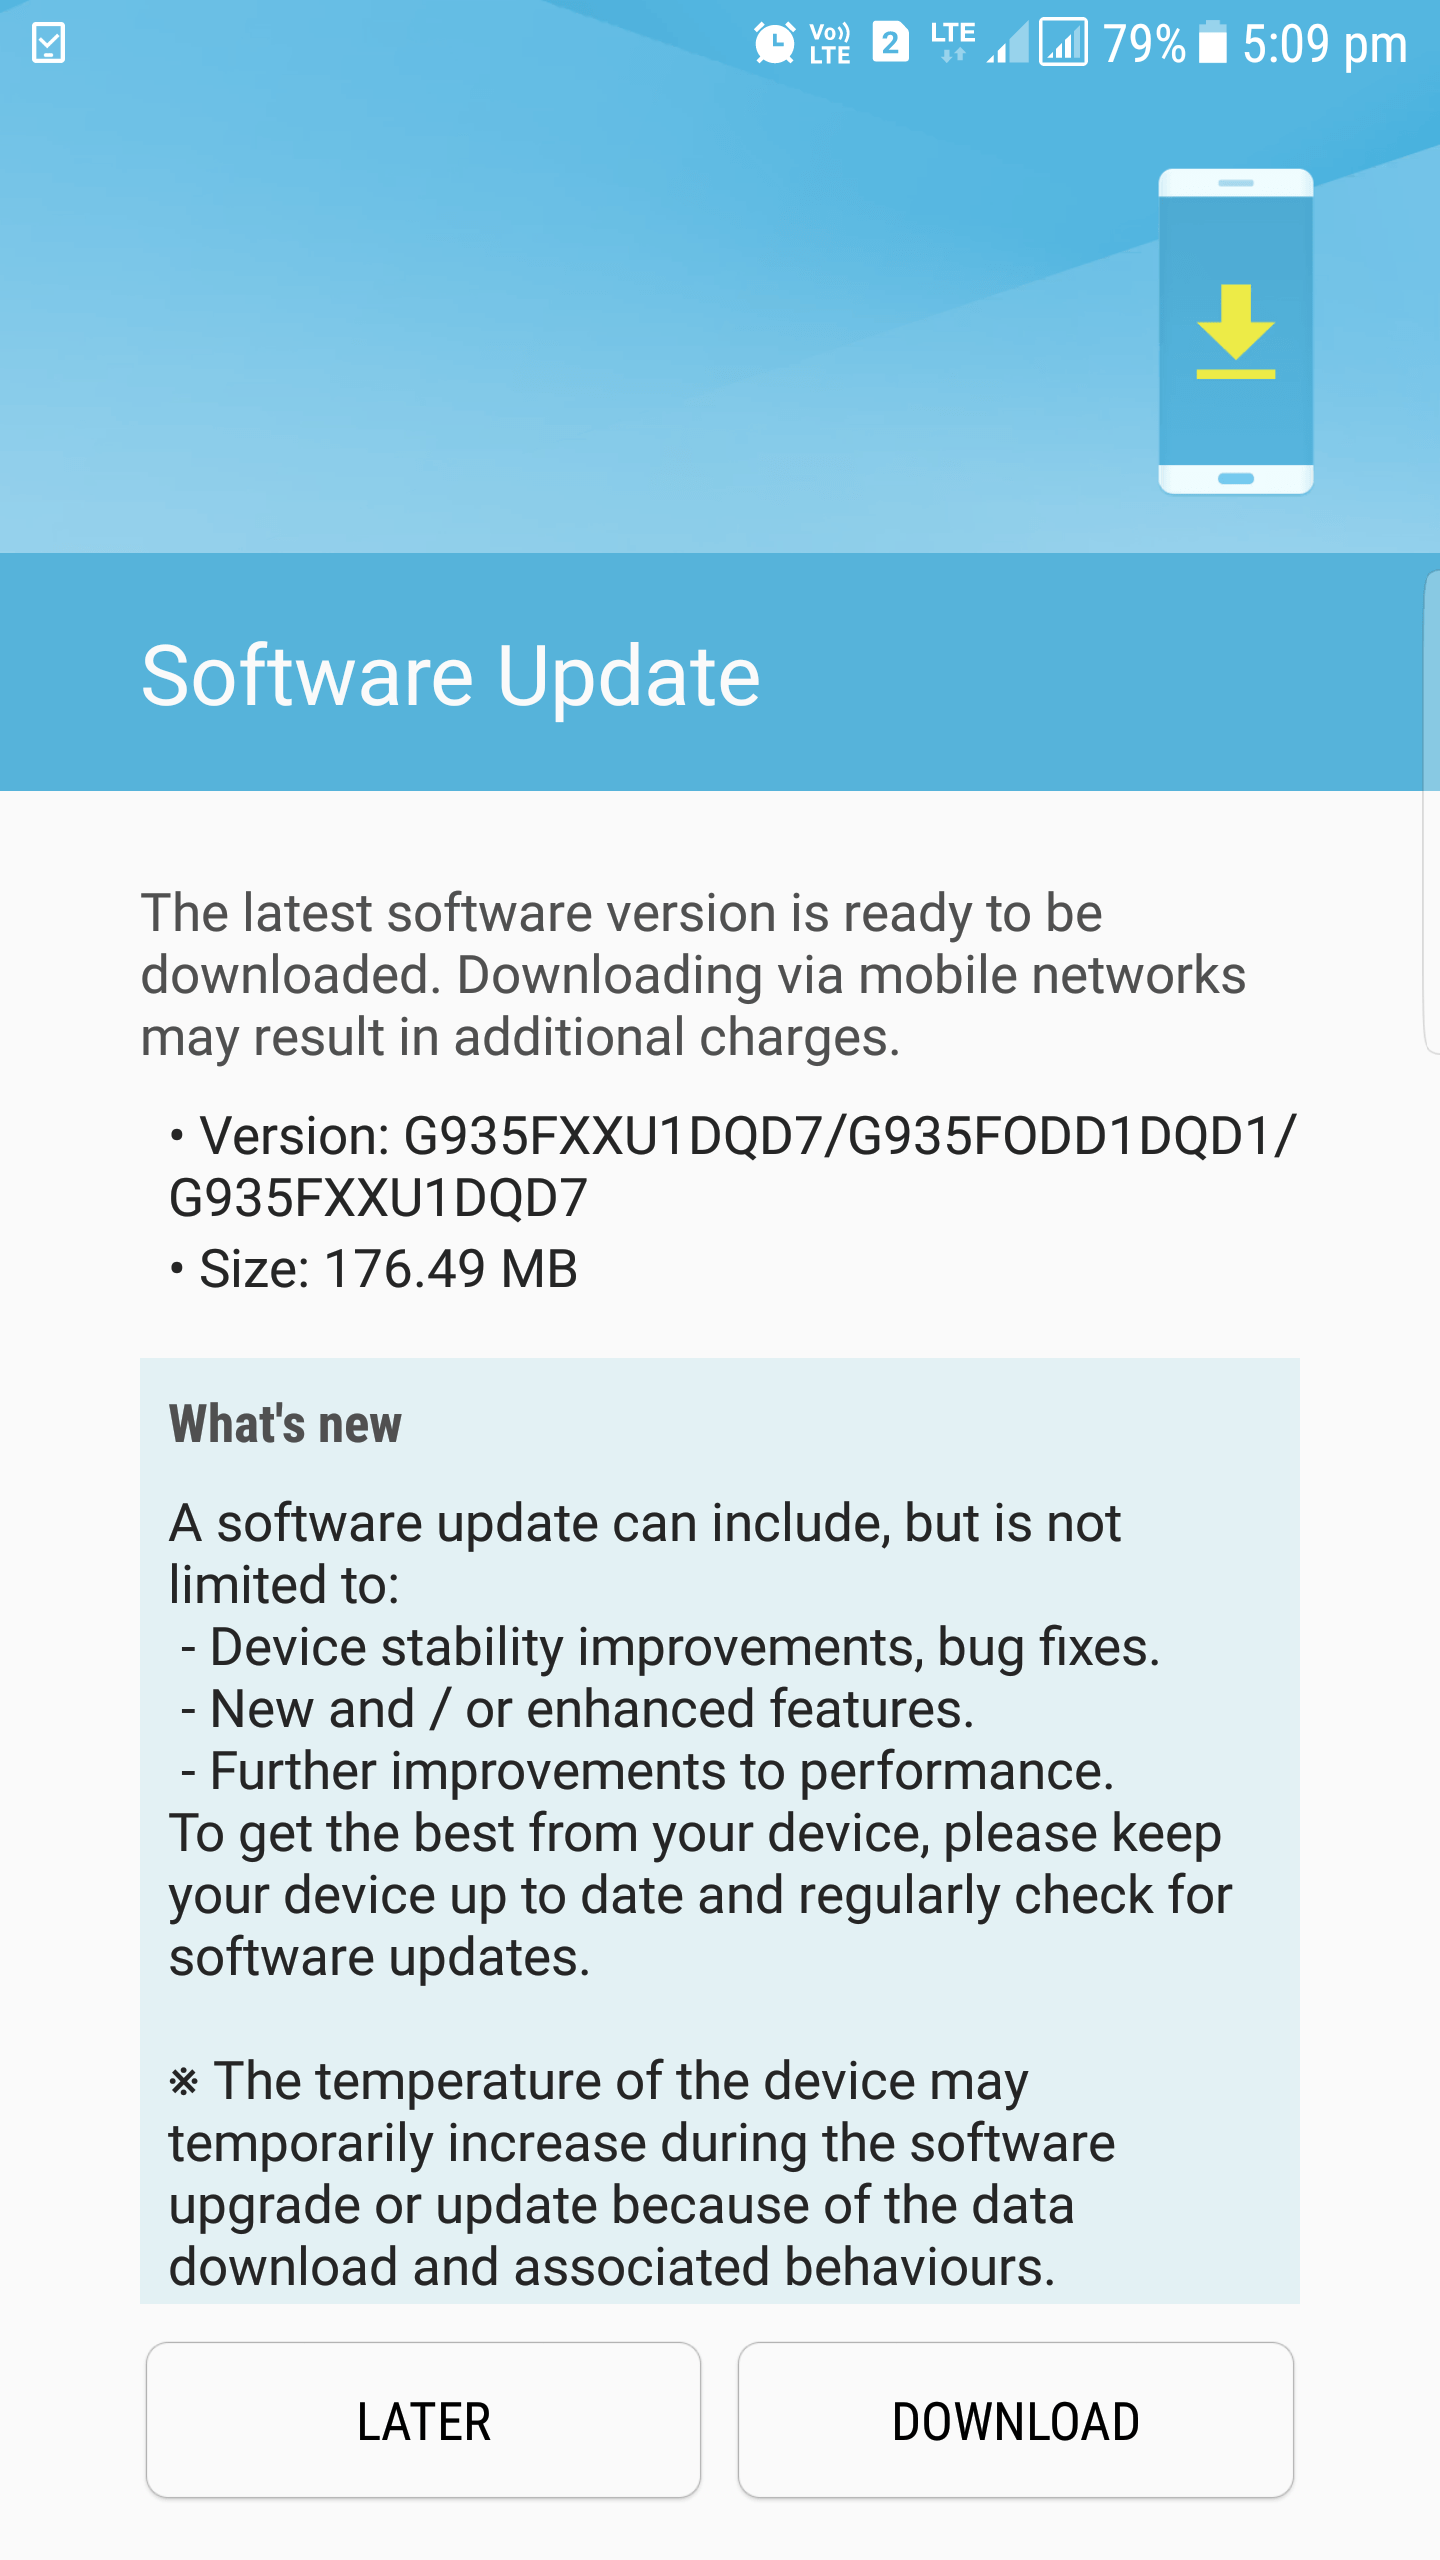 Samsung Galaxy S7 April Security update